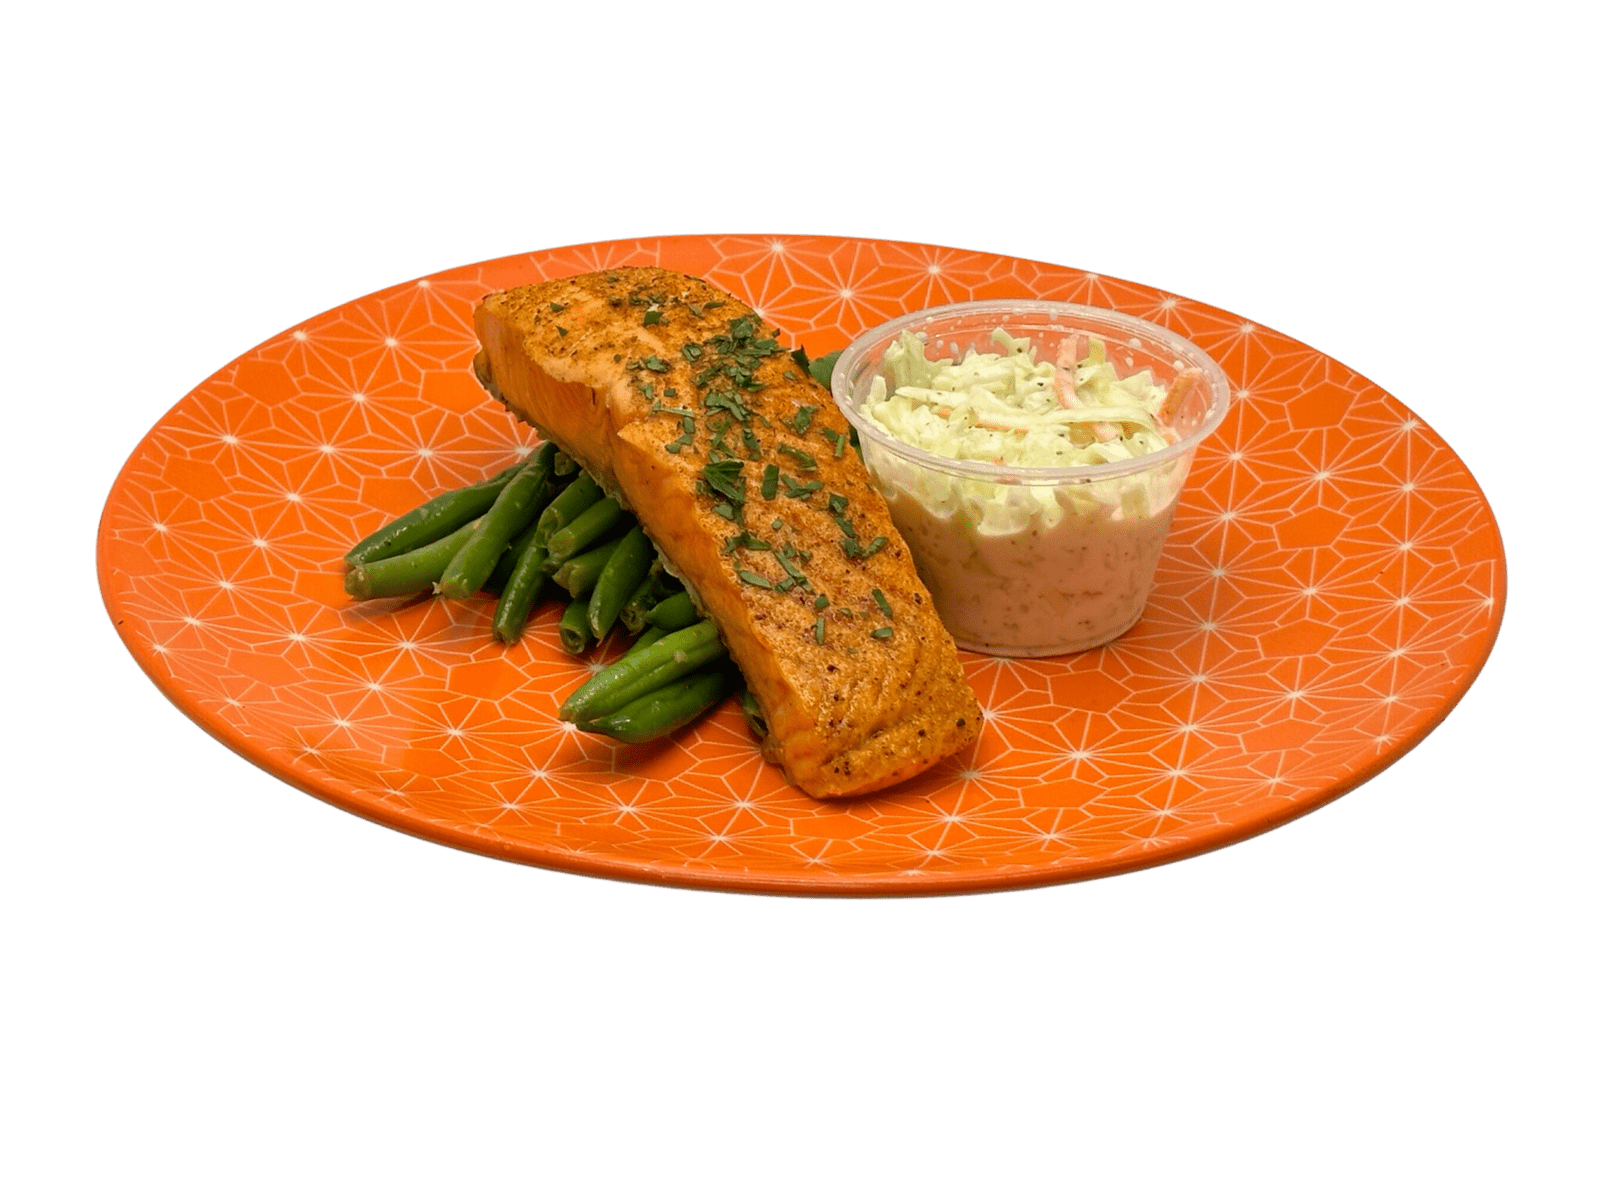 Blackened Salmon with Coleslaw, Green Beans - Whole Body Fuel